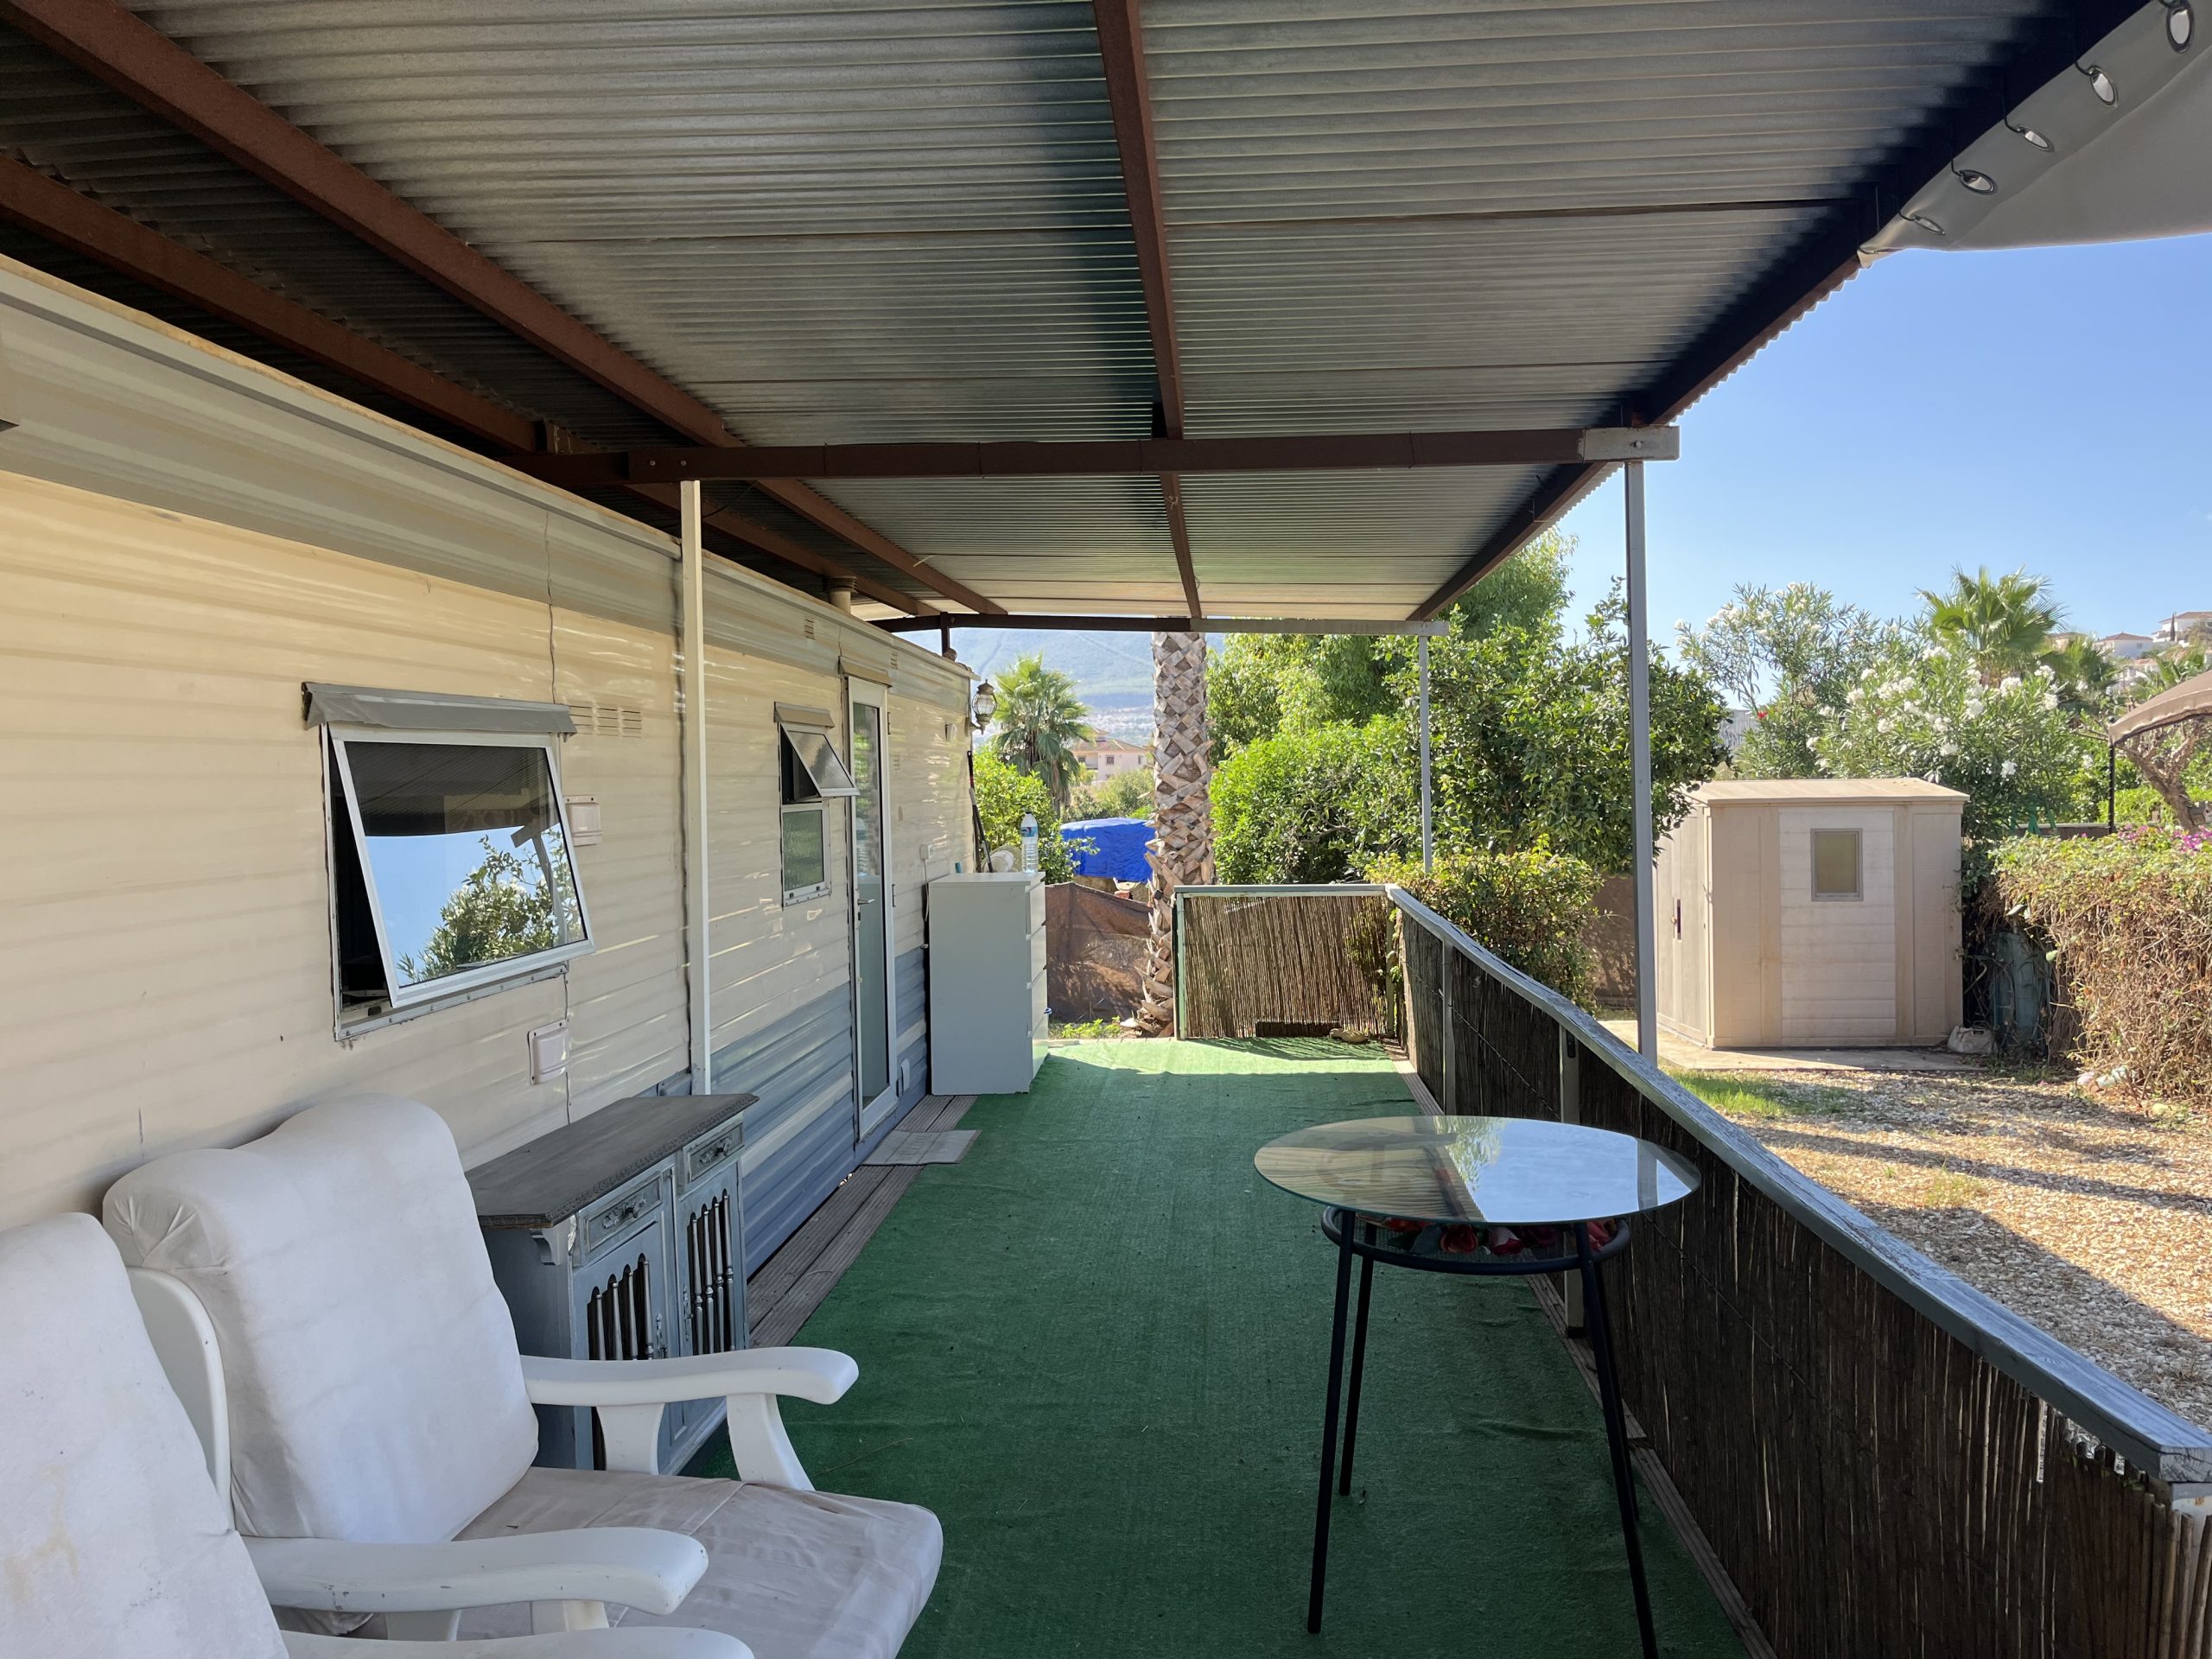 RiS 328 Two bedroom mobile home in excellent location near Coin – 15,000€